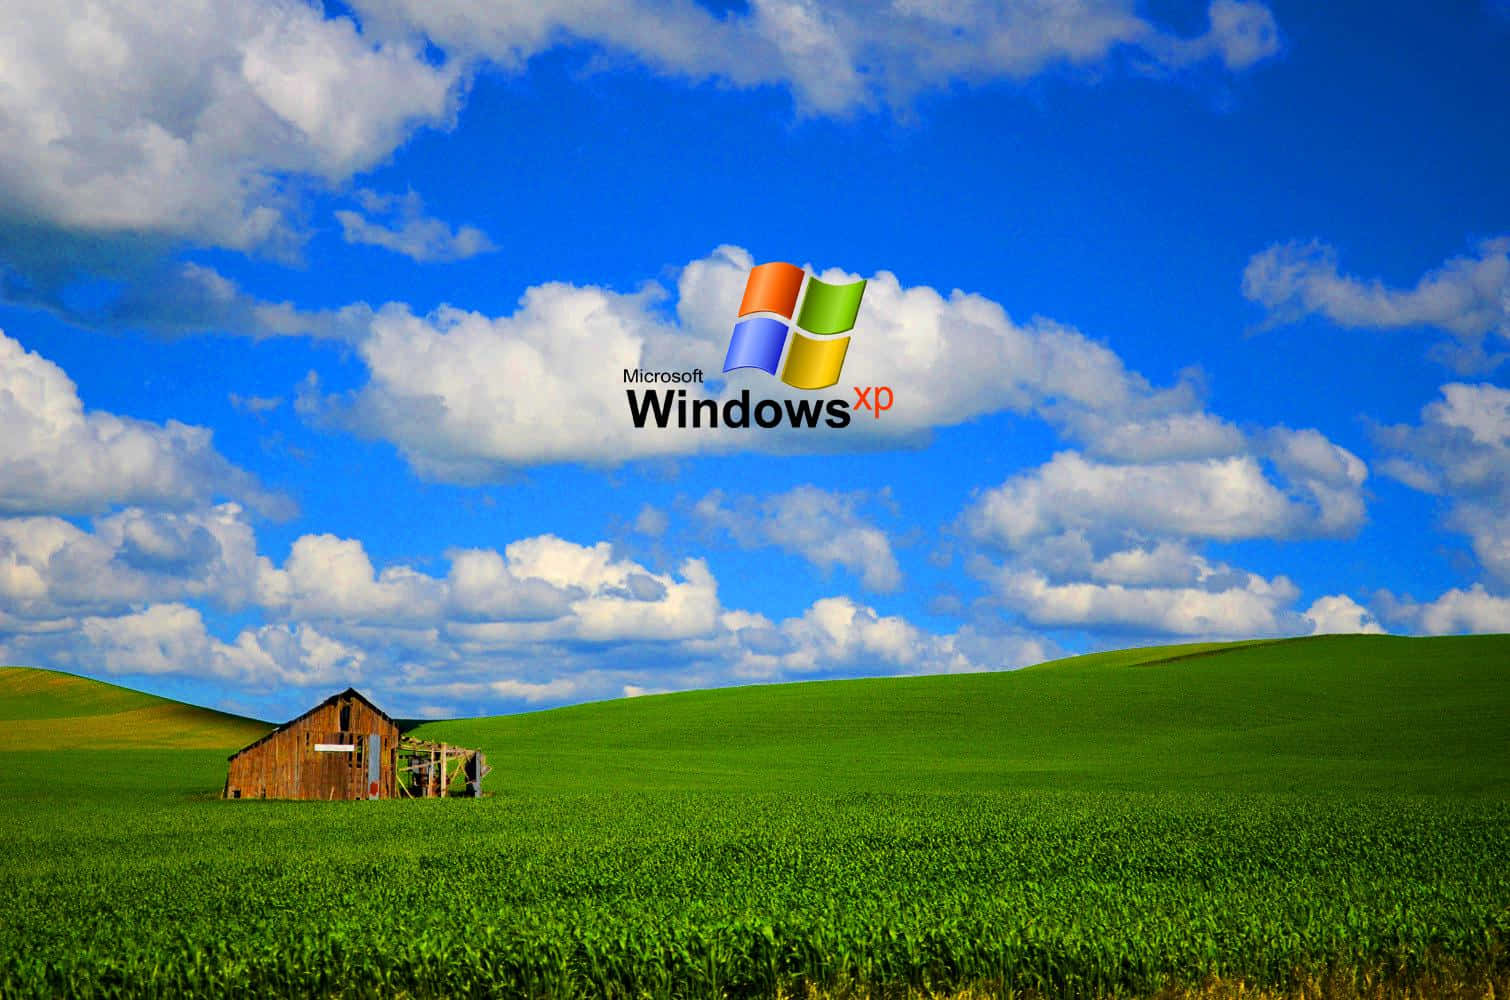 Experience the power of Windows XP